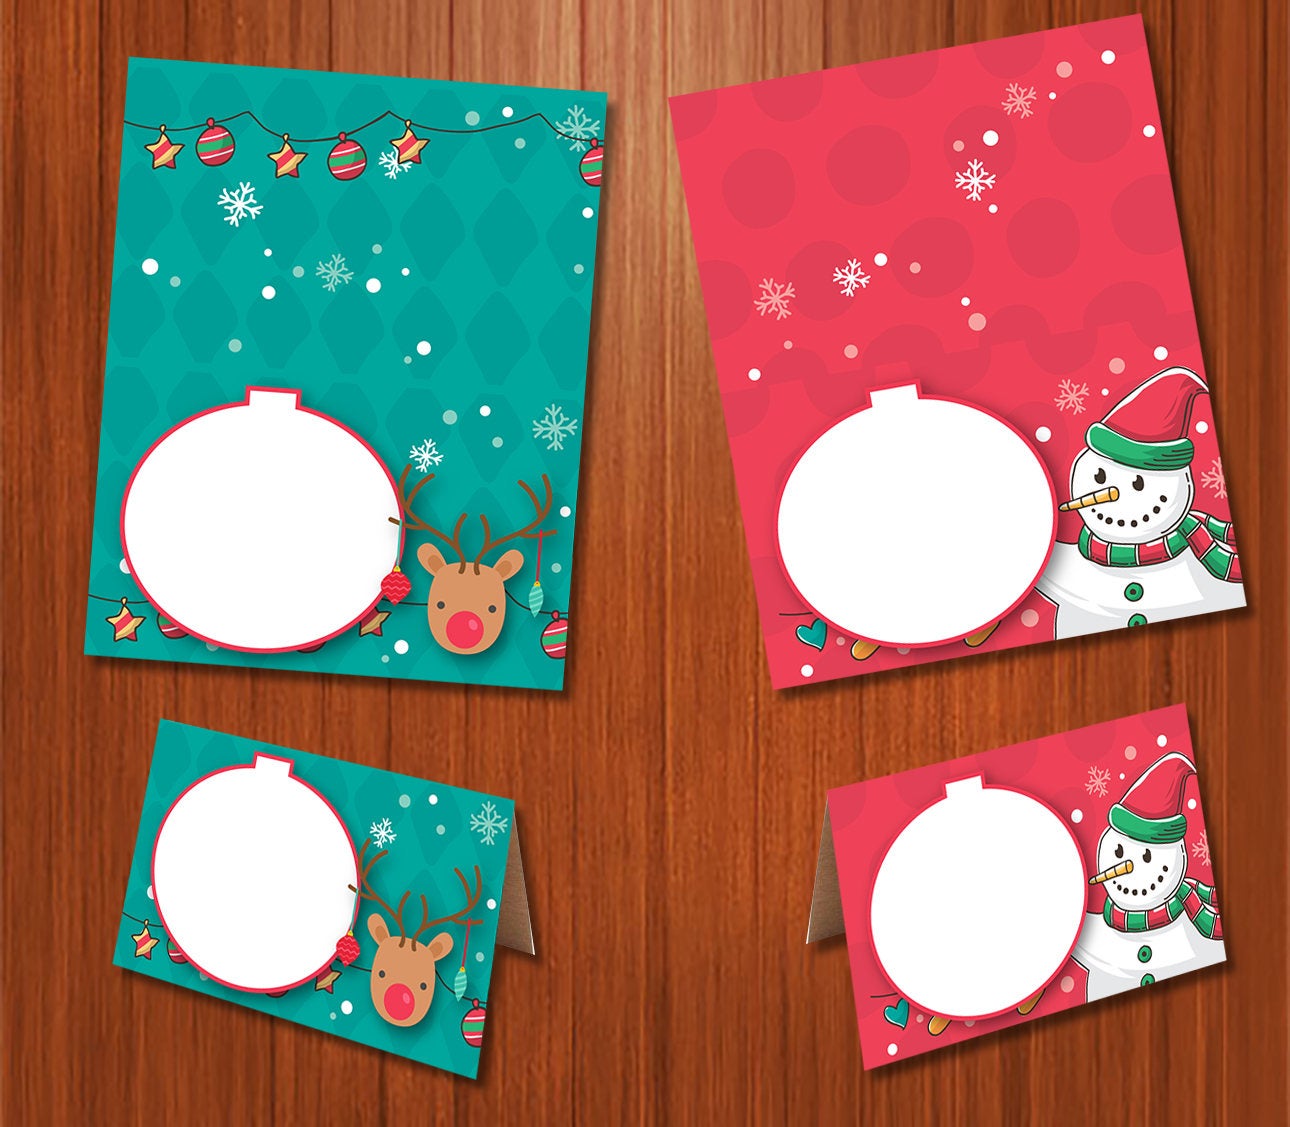 merry-christmas-tent-cards-buffet-labels-buffet-signs-food-tent